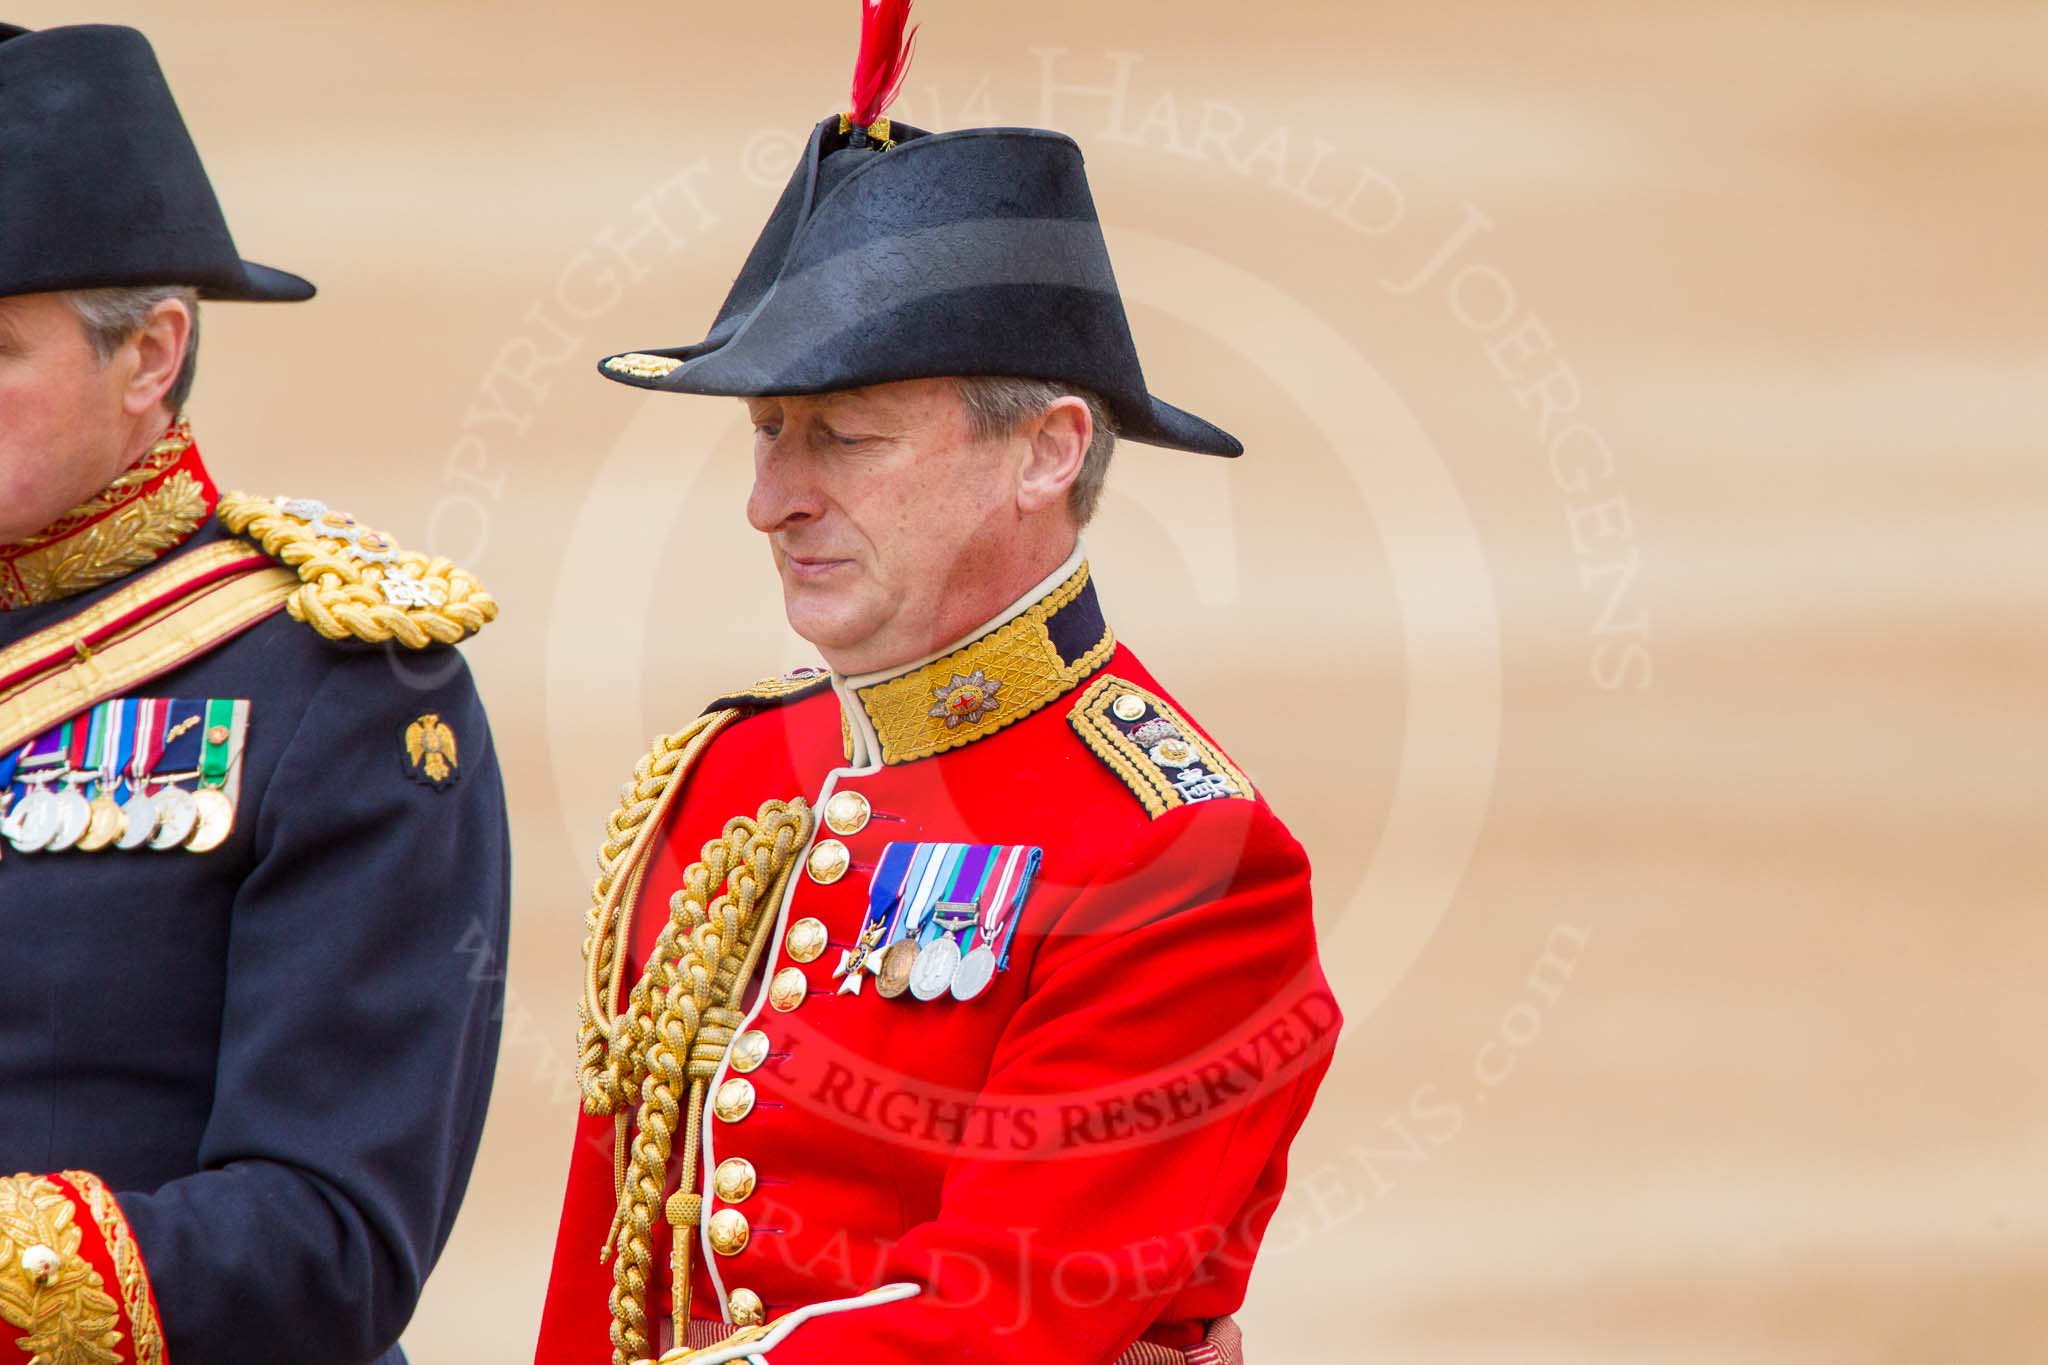 Trooping the Colour 2014.
Horse Guards Parade, Westminster,
London SW1A,

United Kingdom,
on 14 June 2014 at 11:02, image #390